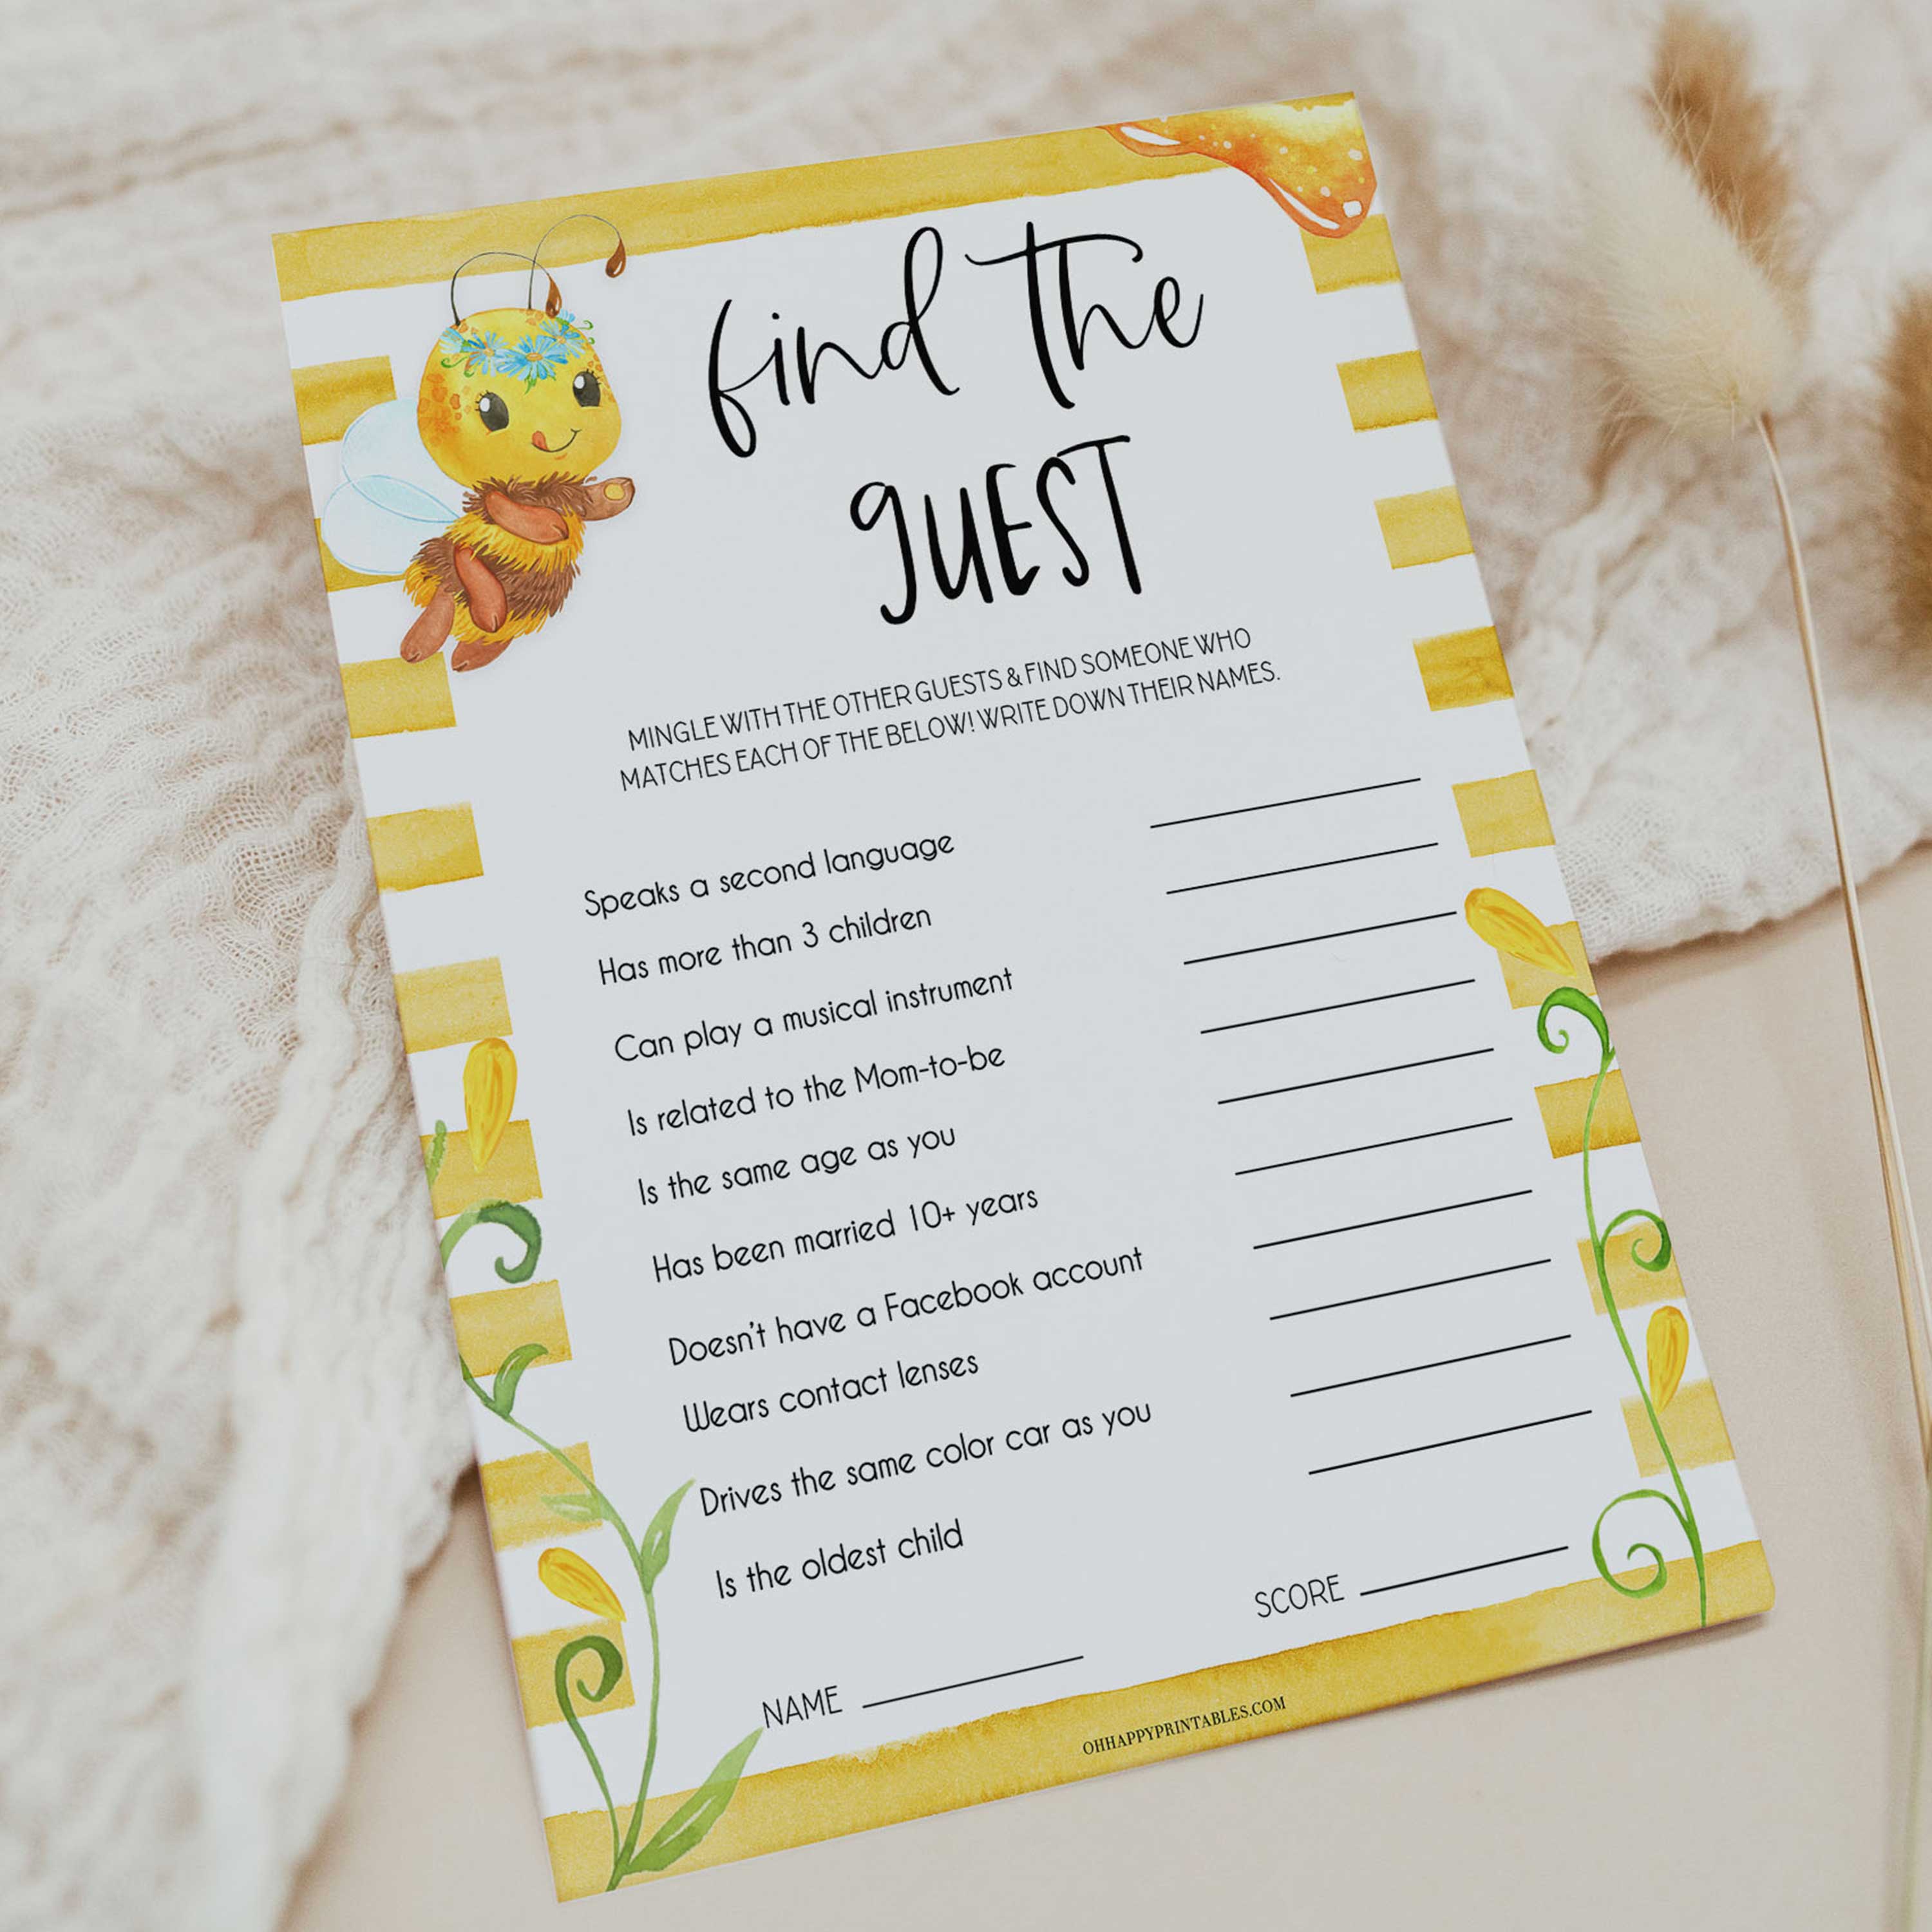 find the guest baby game, Printable baby shower games, mommy bee fun baby games, baby shower games, fun baby shower ideas, top baby shower ideas, mommy to bee baby shower, friends baby shower ideas